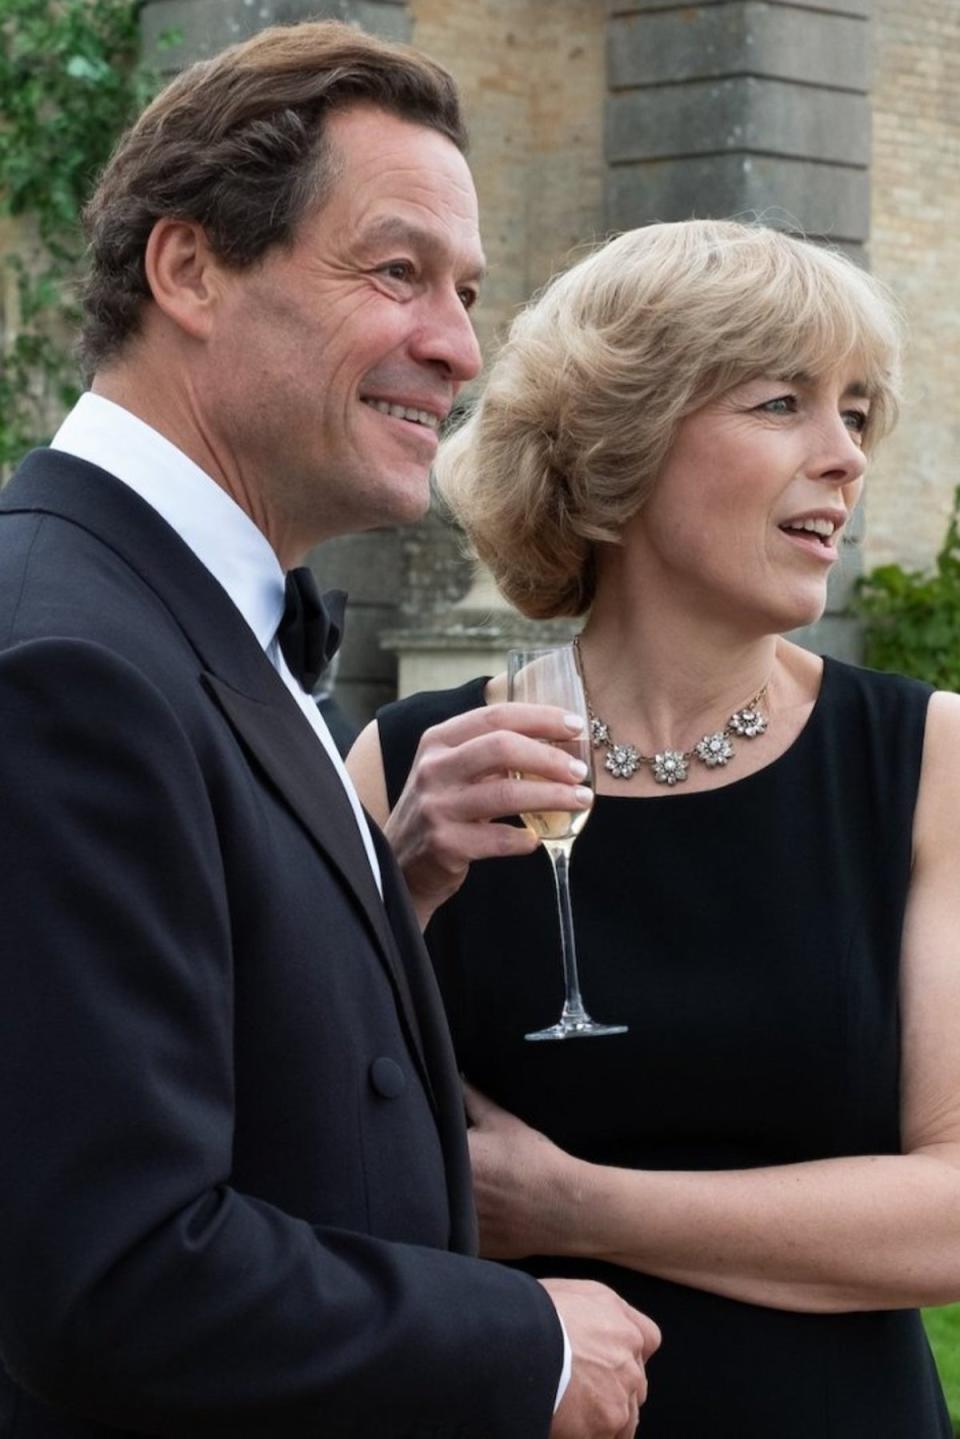 Fabulous wig: Williams as Queen Camilla, alongside Dominic West’s Charles, in ‘The Crown’ (Netflix)